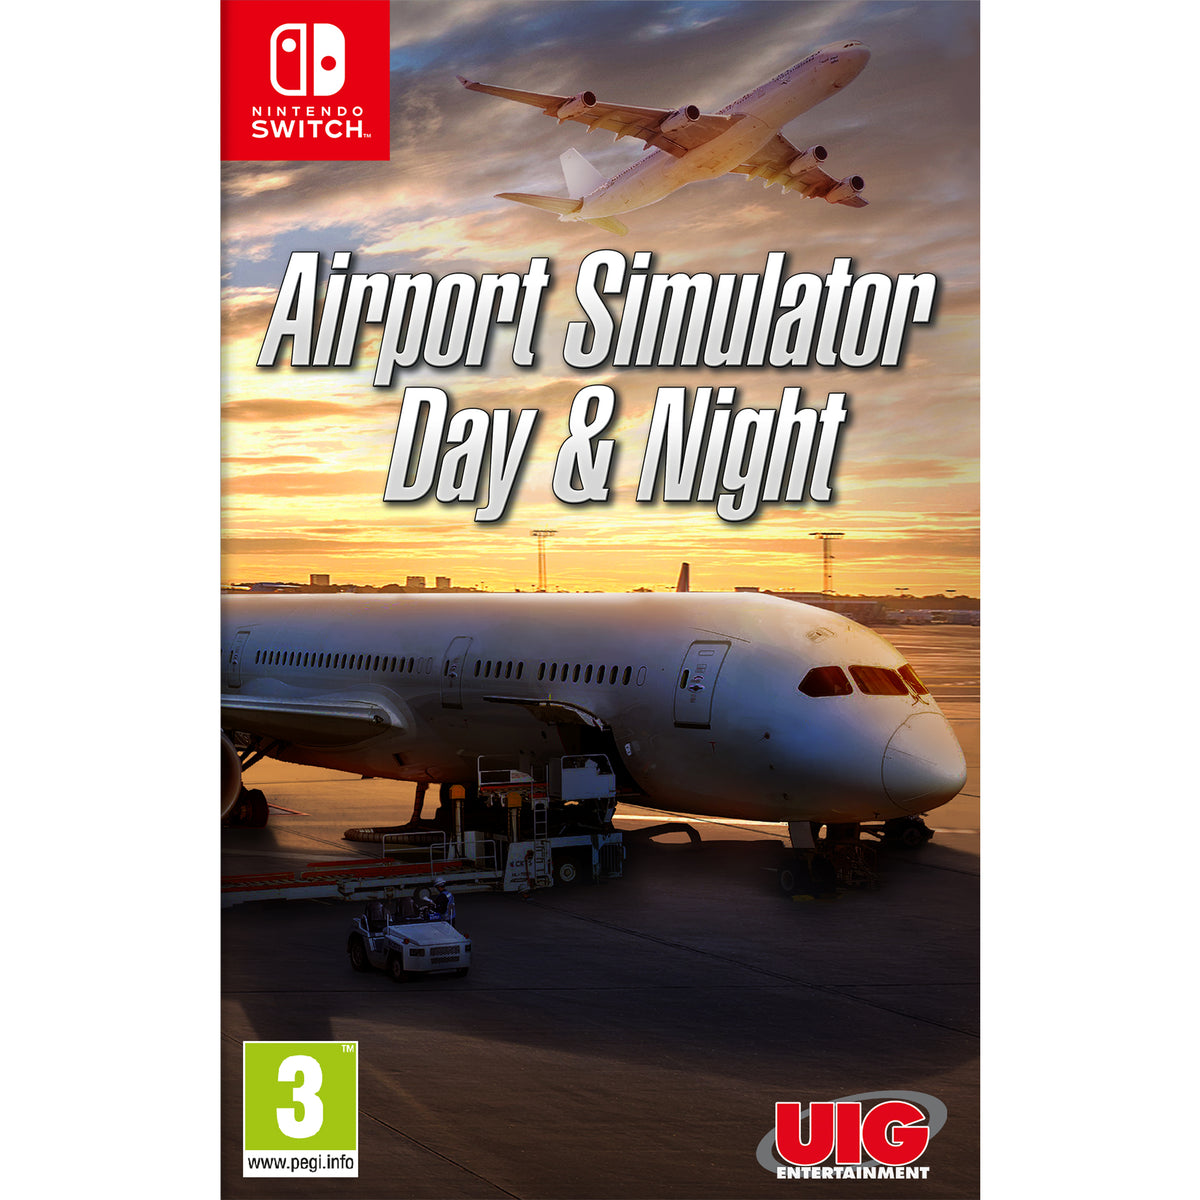 Airport Simulator Day & Night - Switch – Go's Deal Of The Day!